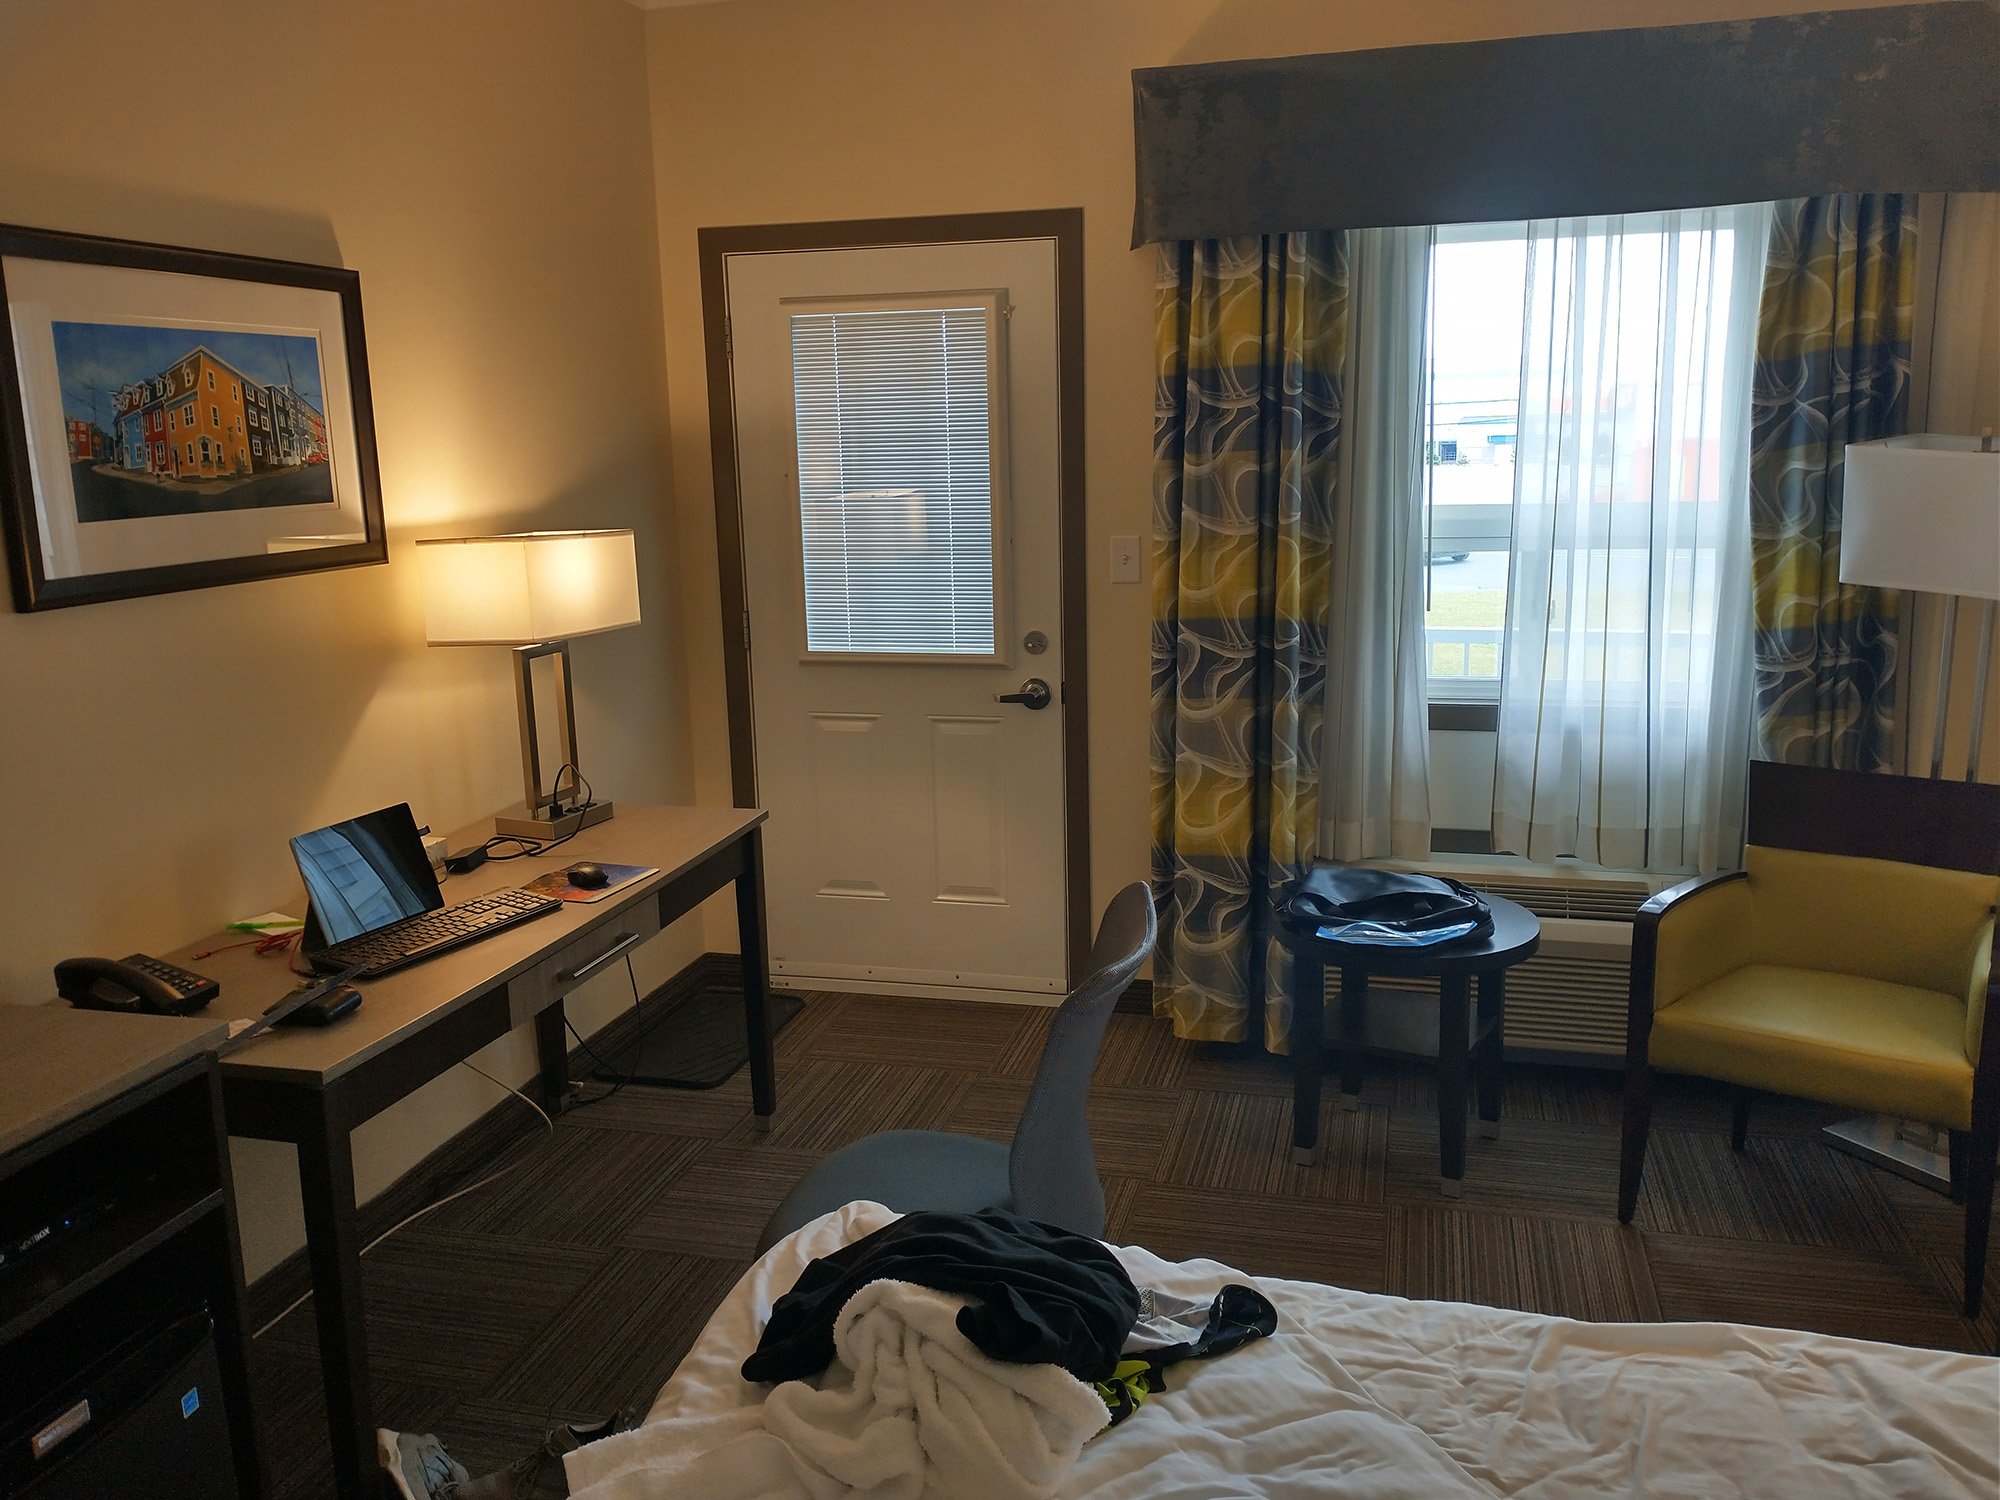 Got myself a hotel room in St-John's to celebrate the end of the trip. 143$, but free laundry! That's the cheapest one around btw. Gives you an idea of why to sleep in a car.